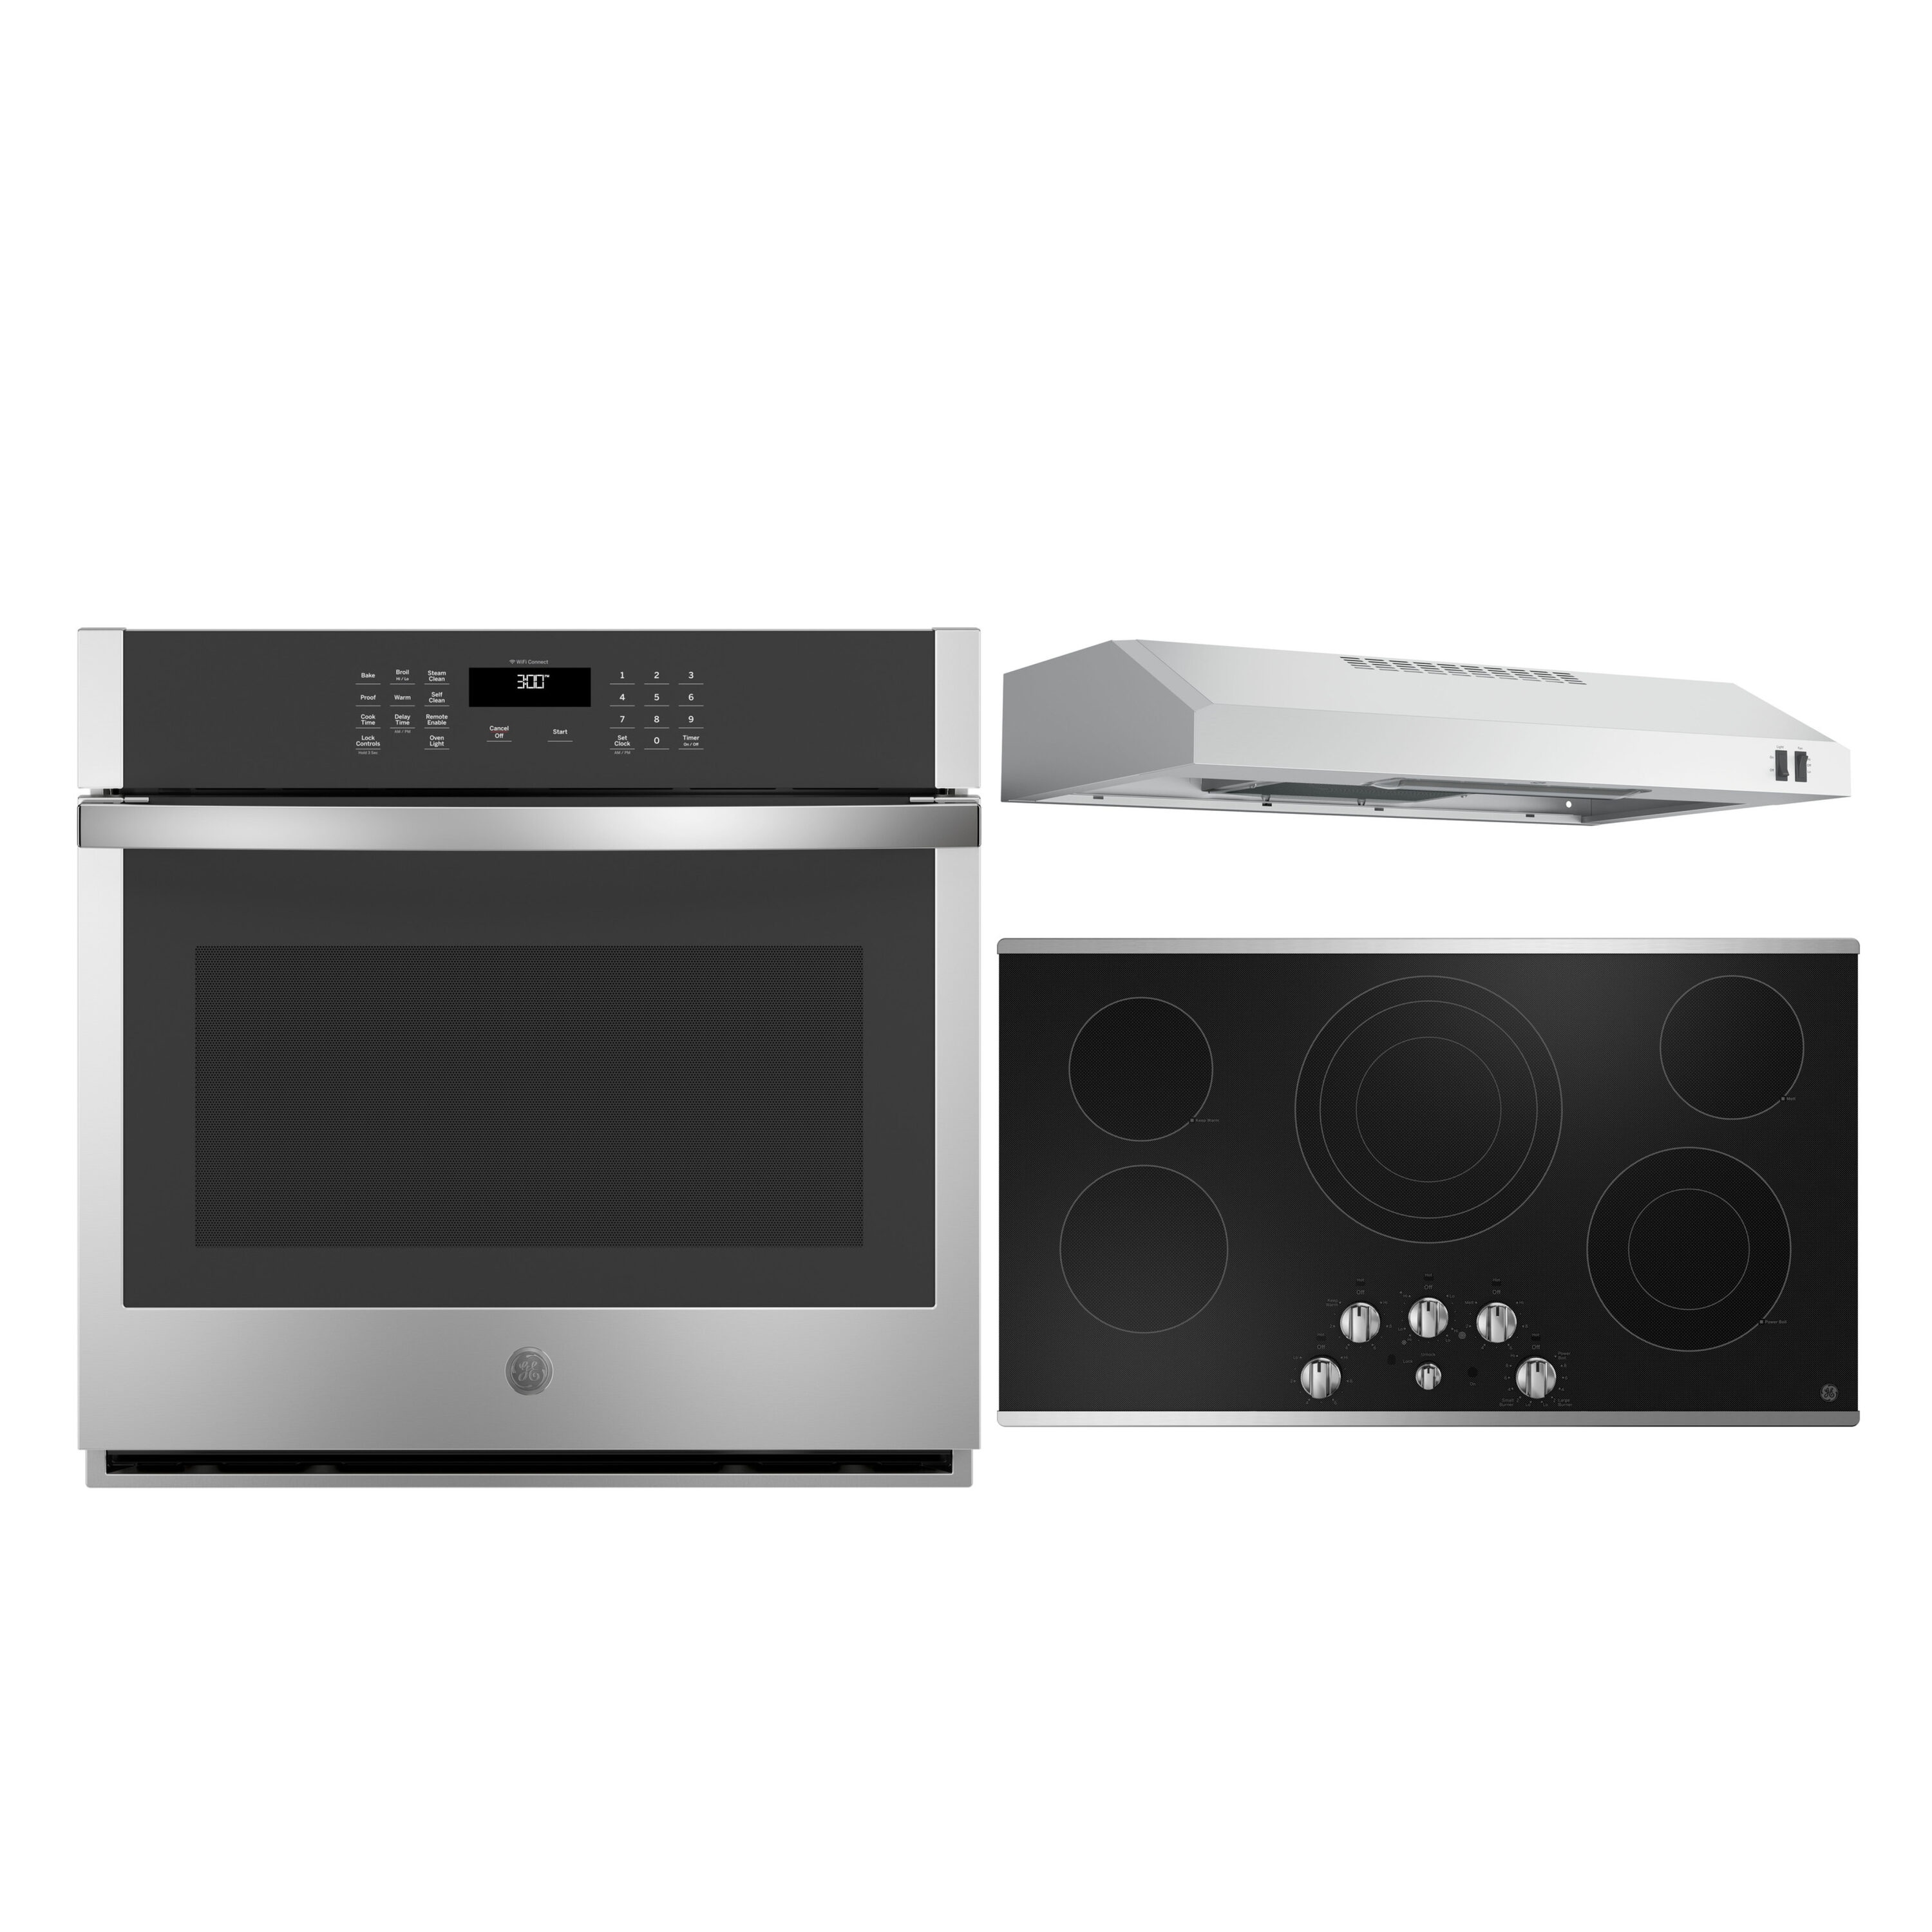 4 Piece Kitchen Package with 30 Range & 30 Electric Cooktop & Wall Oven Cosmo COS-4PKG-134